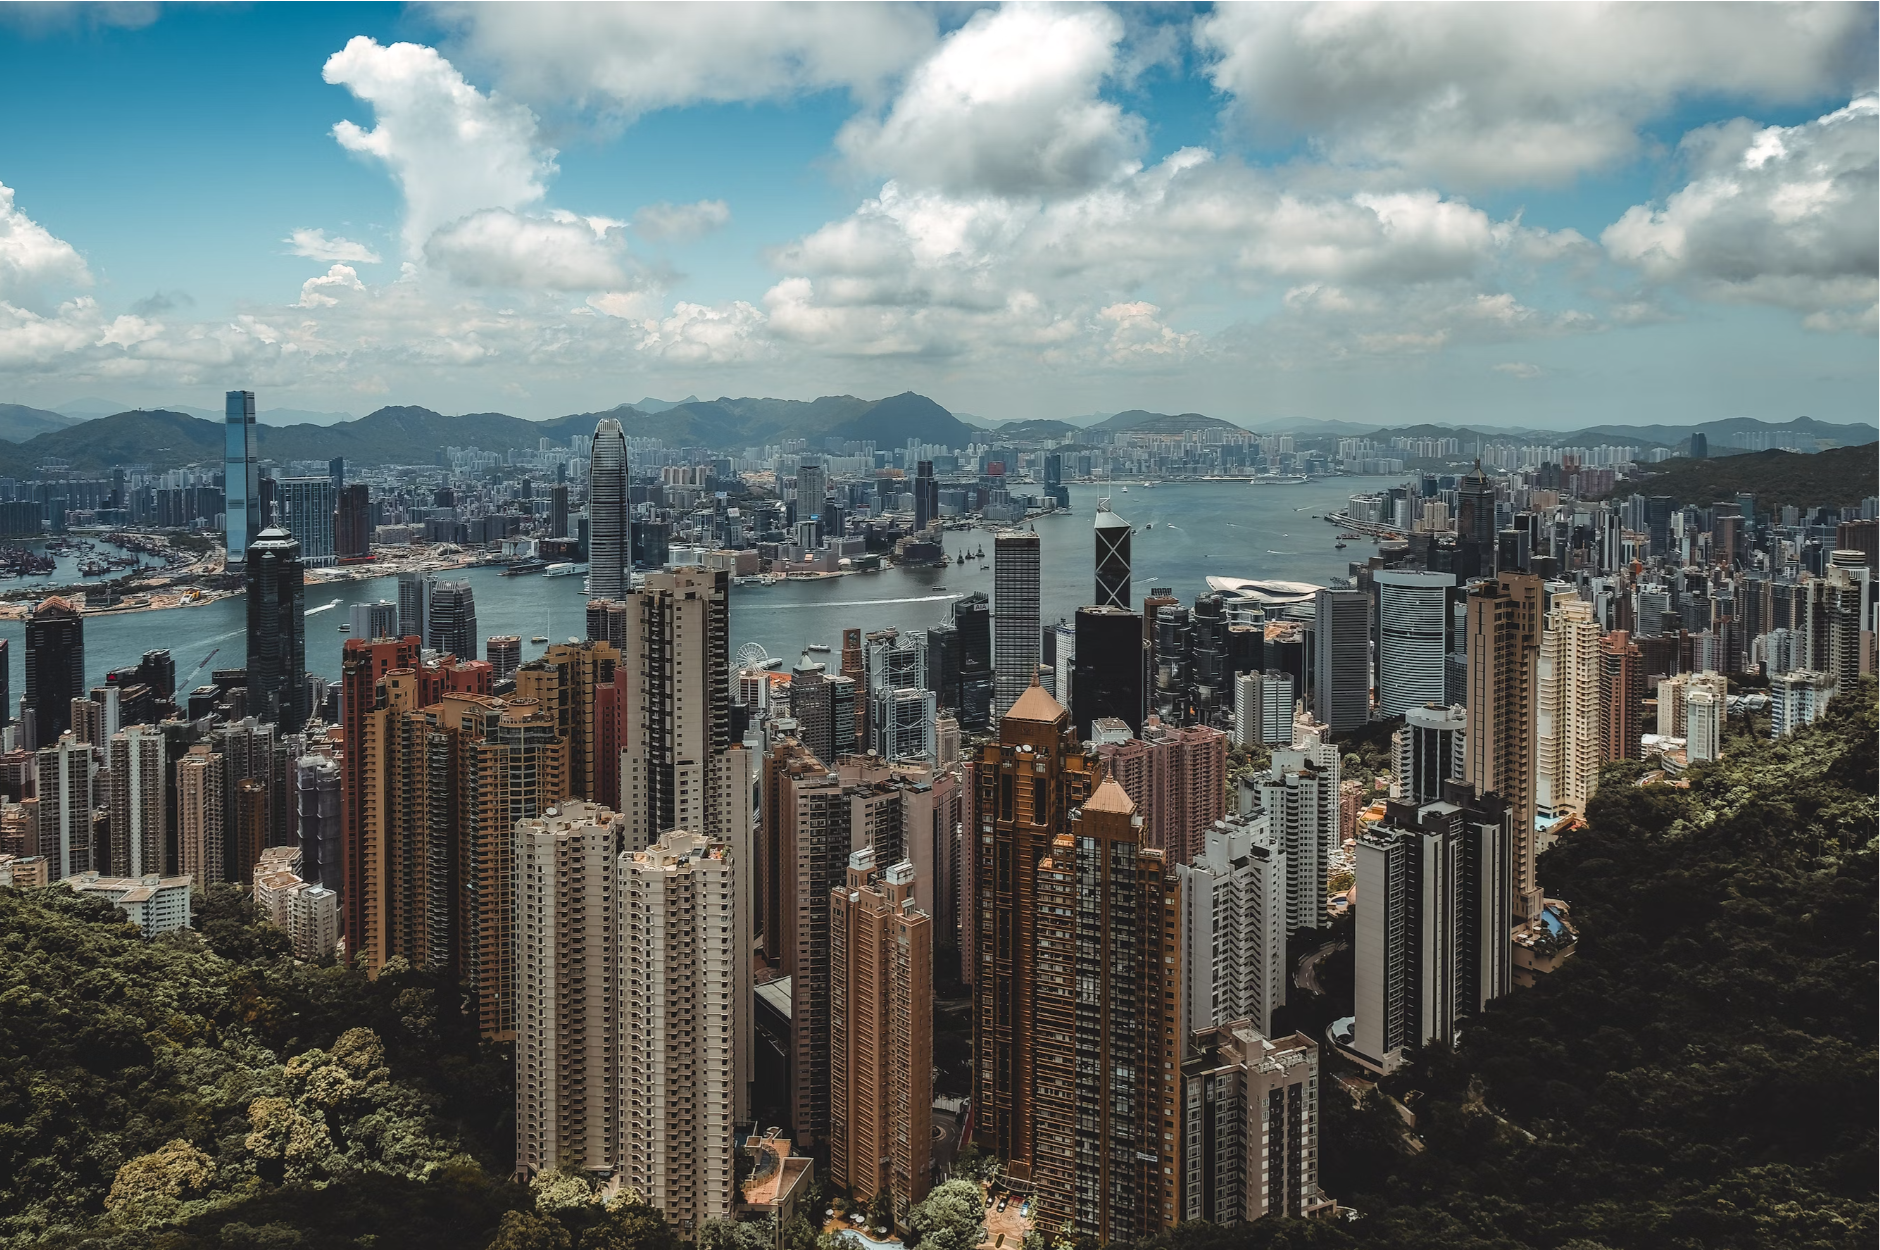 This photograph has an aerial view of the daytime Hong Kong cityscape of modern buildings with a bay crossing between. Trees and greeny natural environment surround the cityscape.